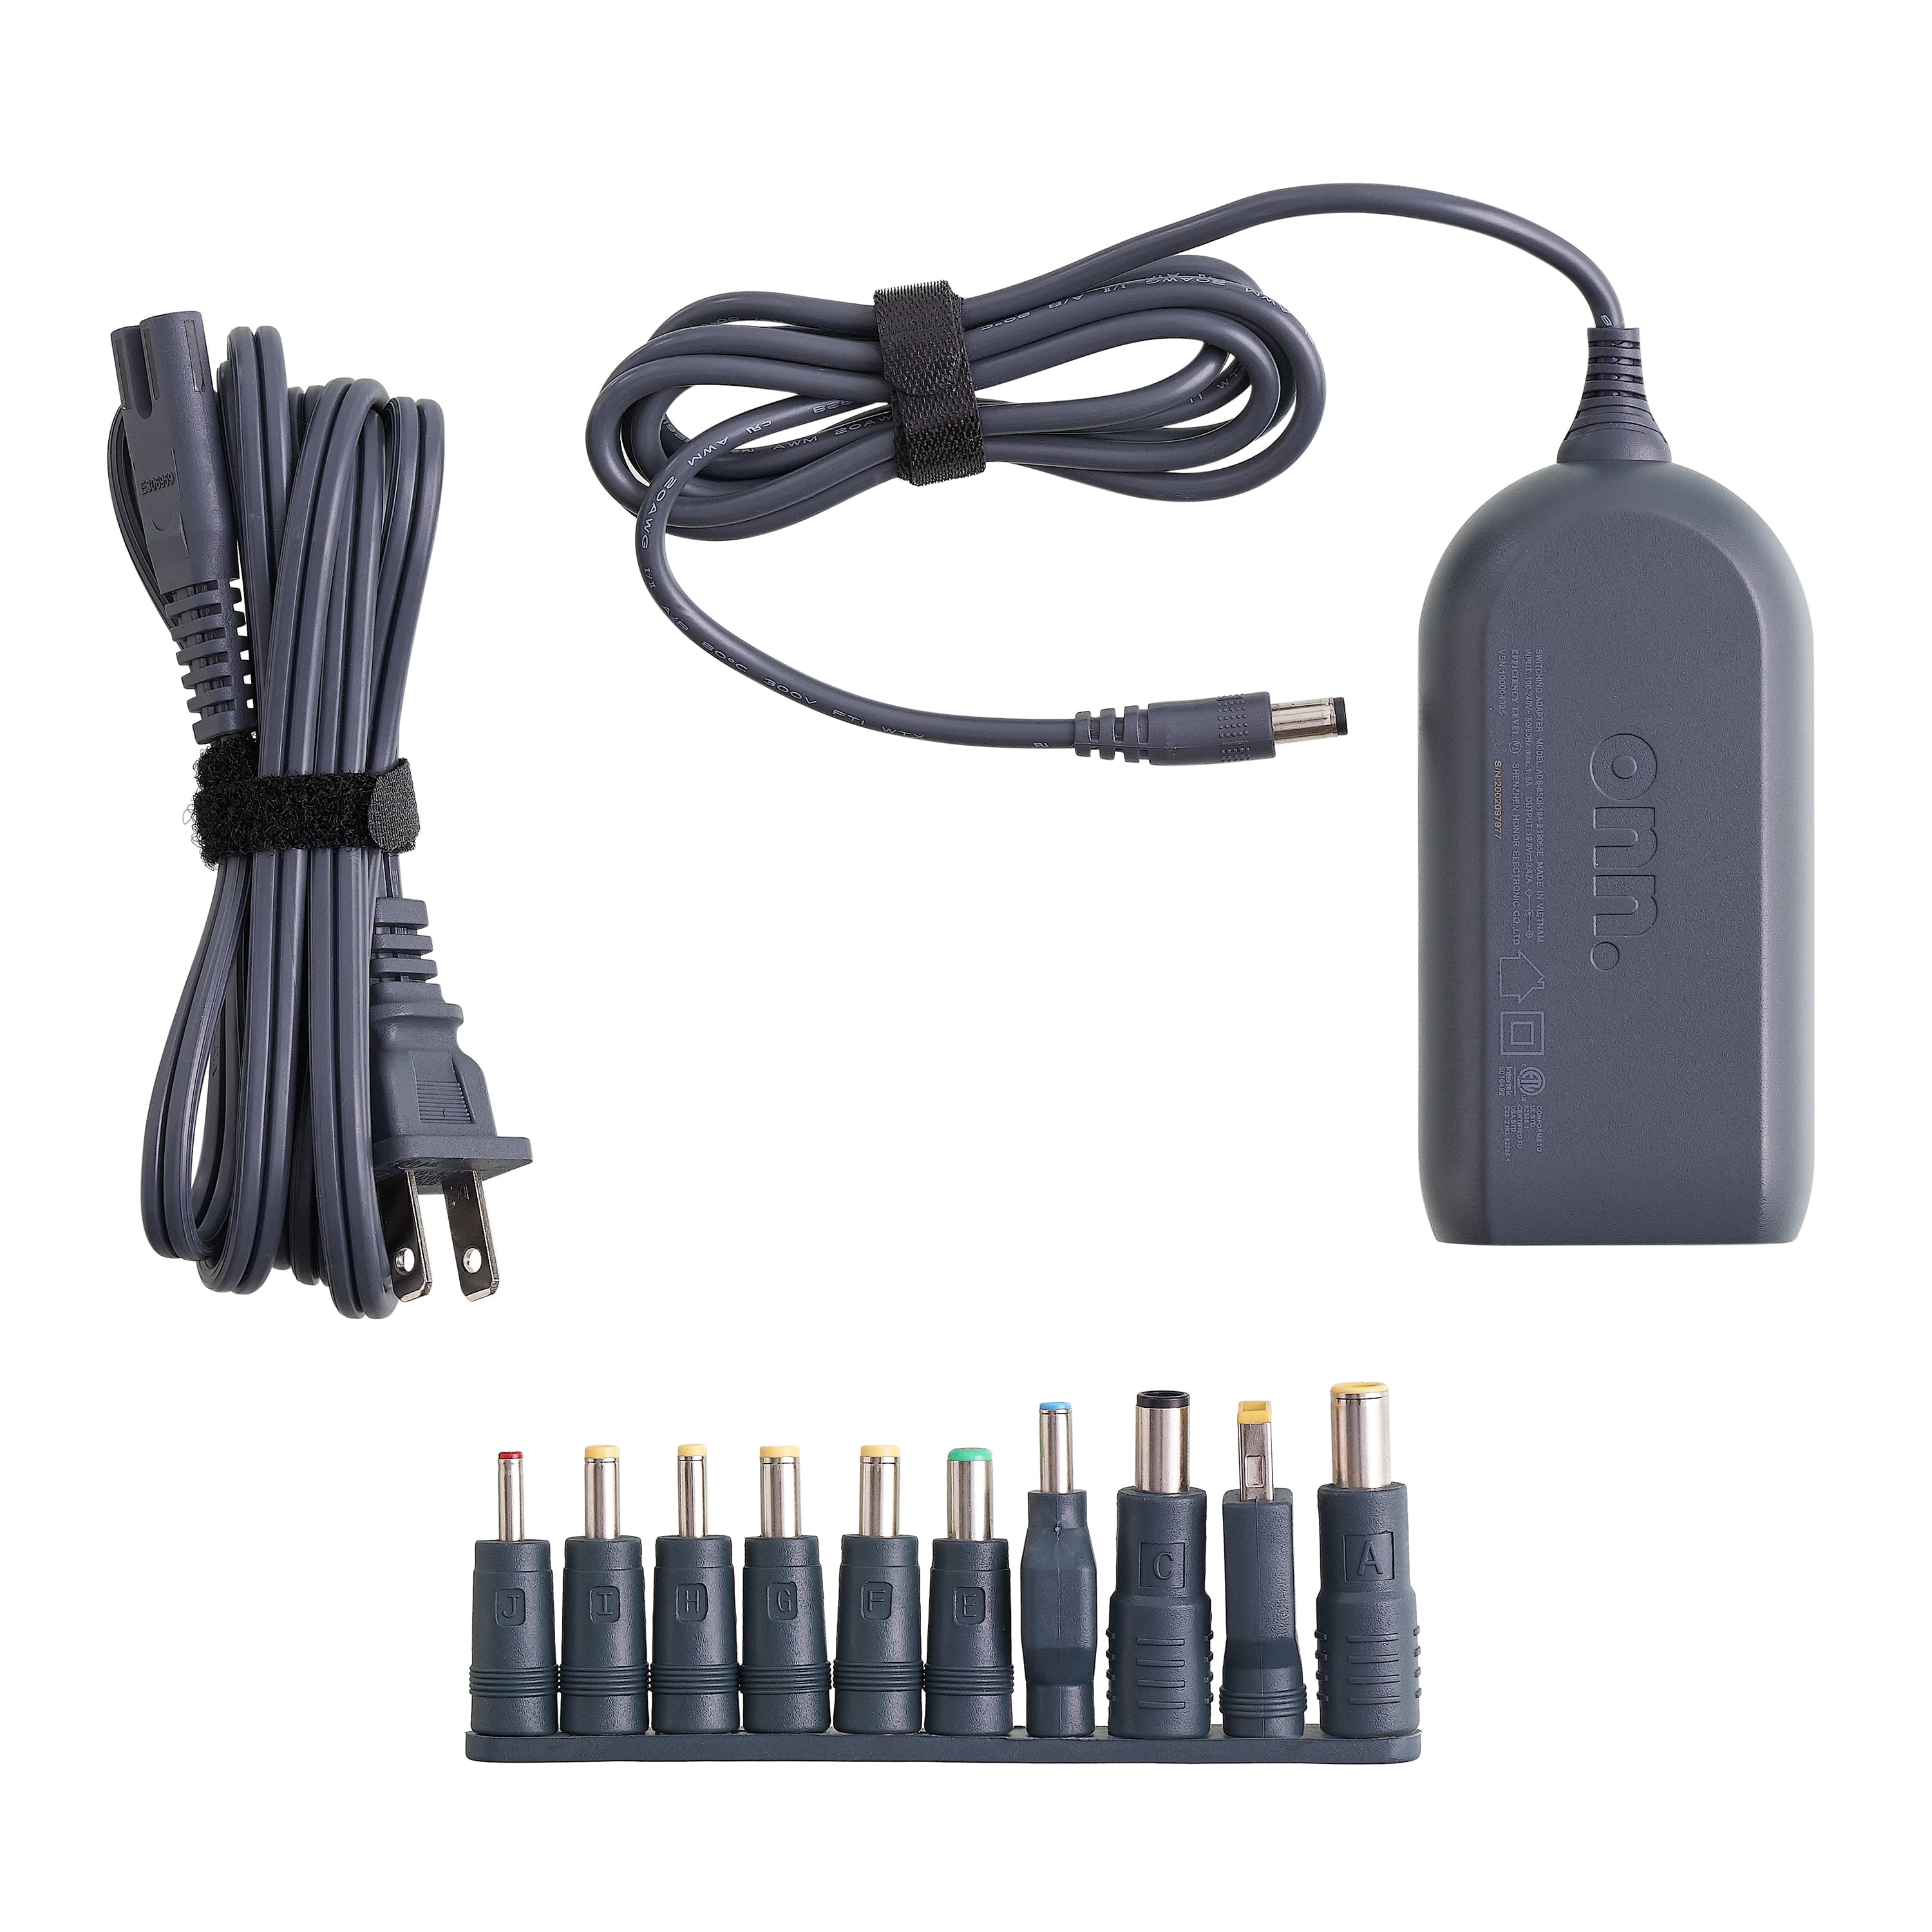 onn. 65W Laptop Charger with 10 Interchangeable Tips, 10 ft Power Cords,  for HP, Dell, Lenovo, laptop. 